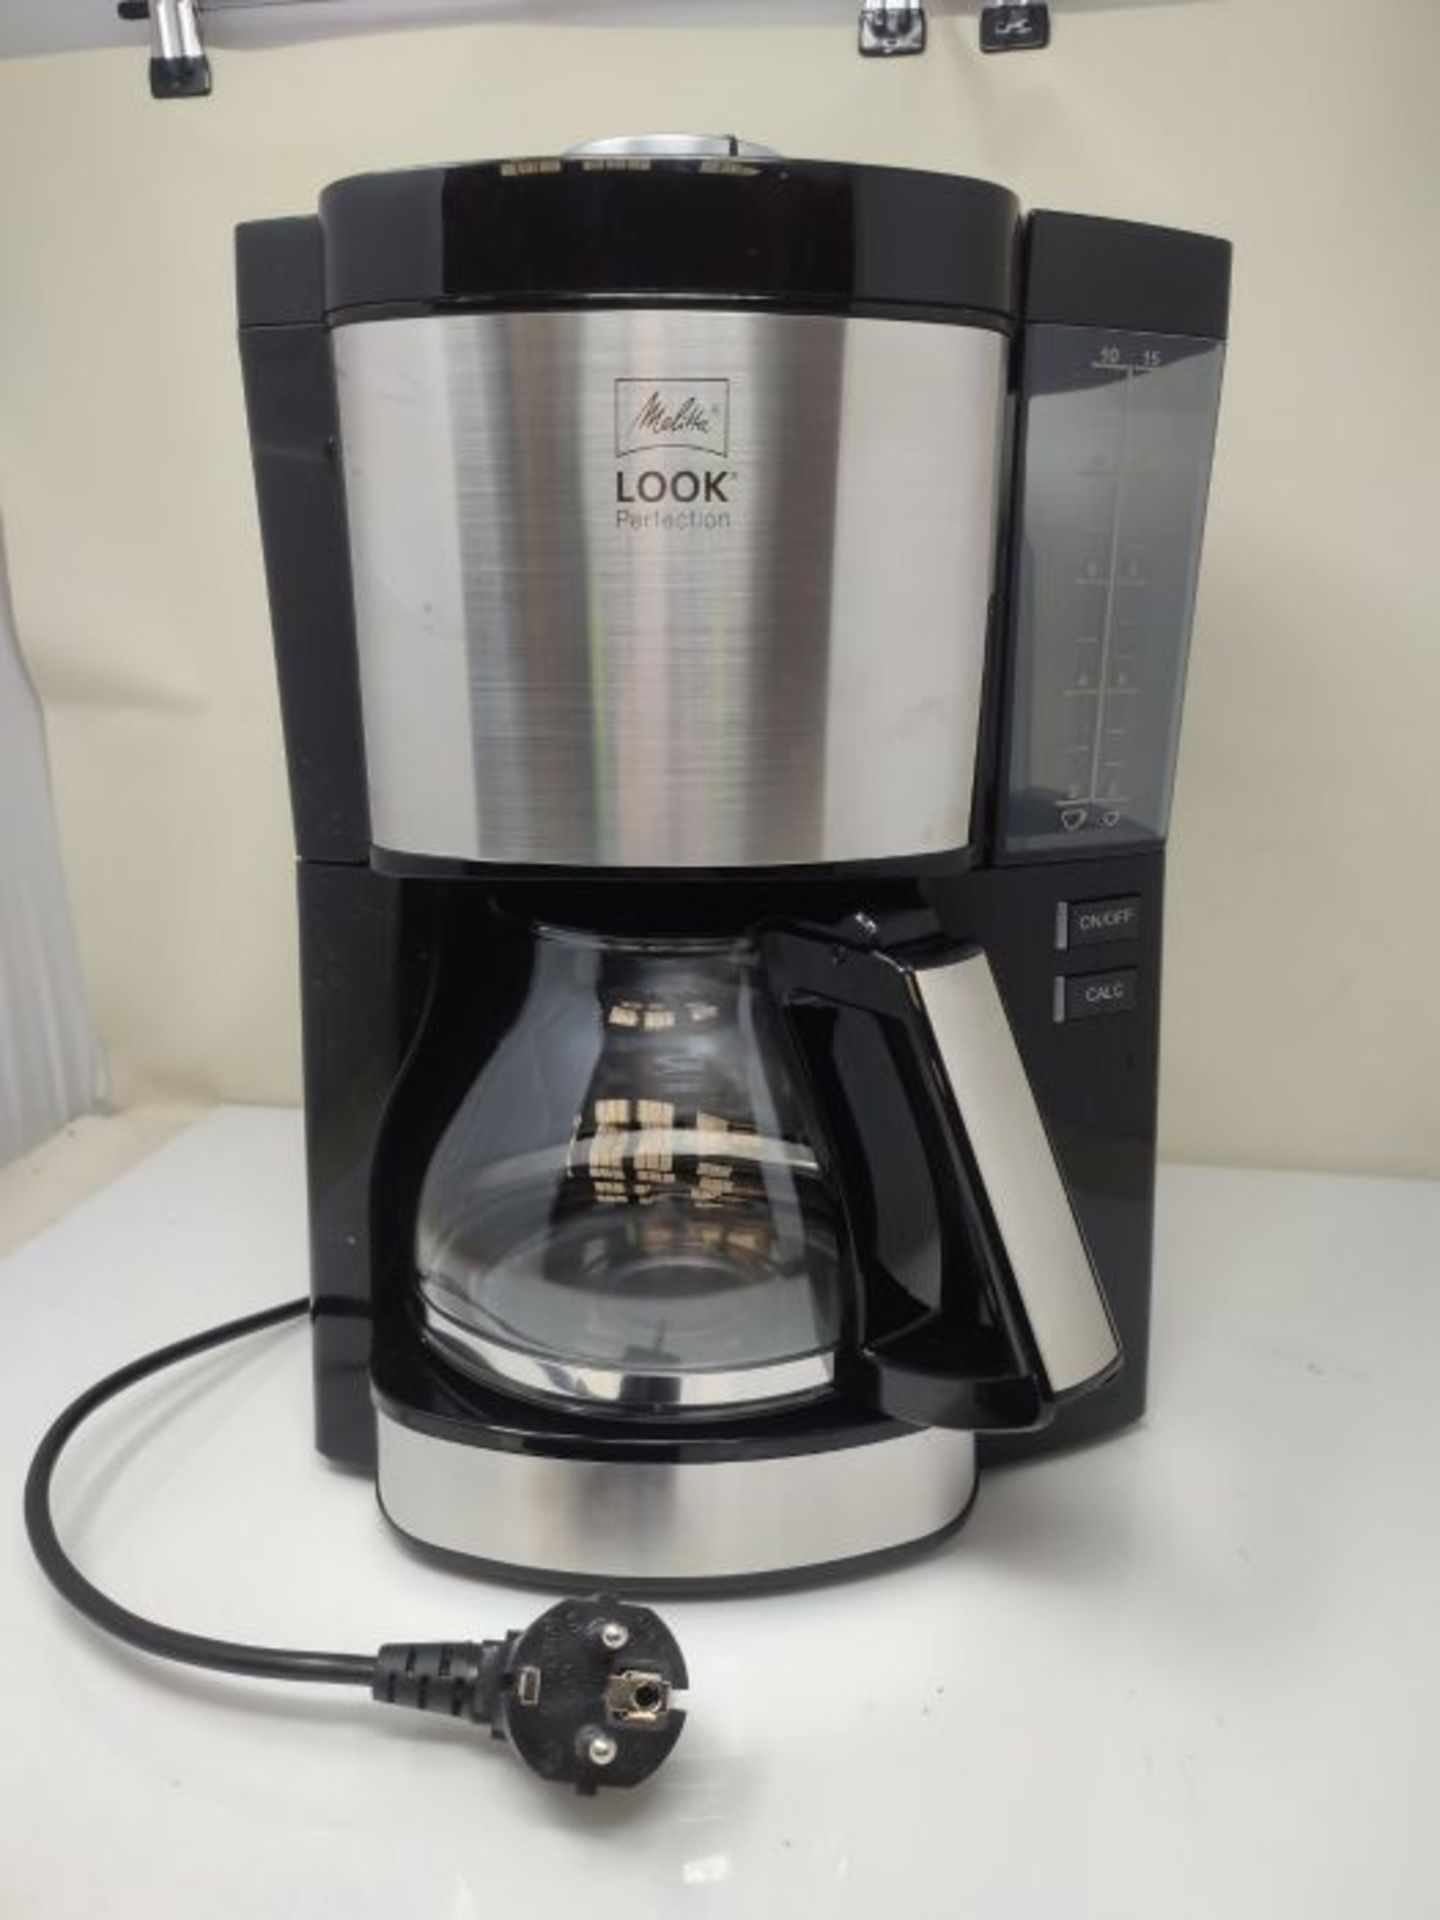 RRP £59.00 Melitta Filter Coffee Machine, Look V Perfection Model, Art. No. 6766589, Stainless St - Image 3 of 3